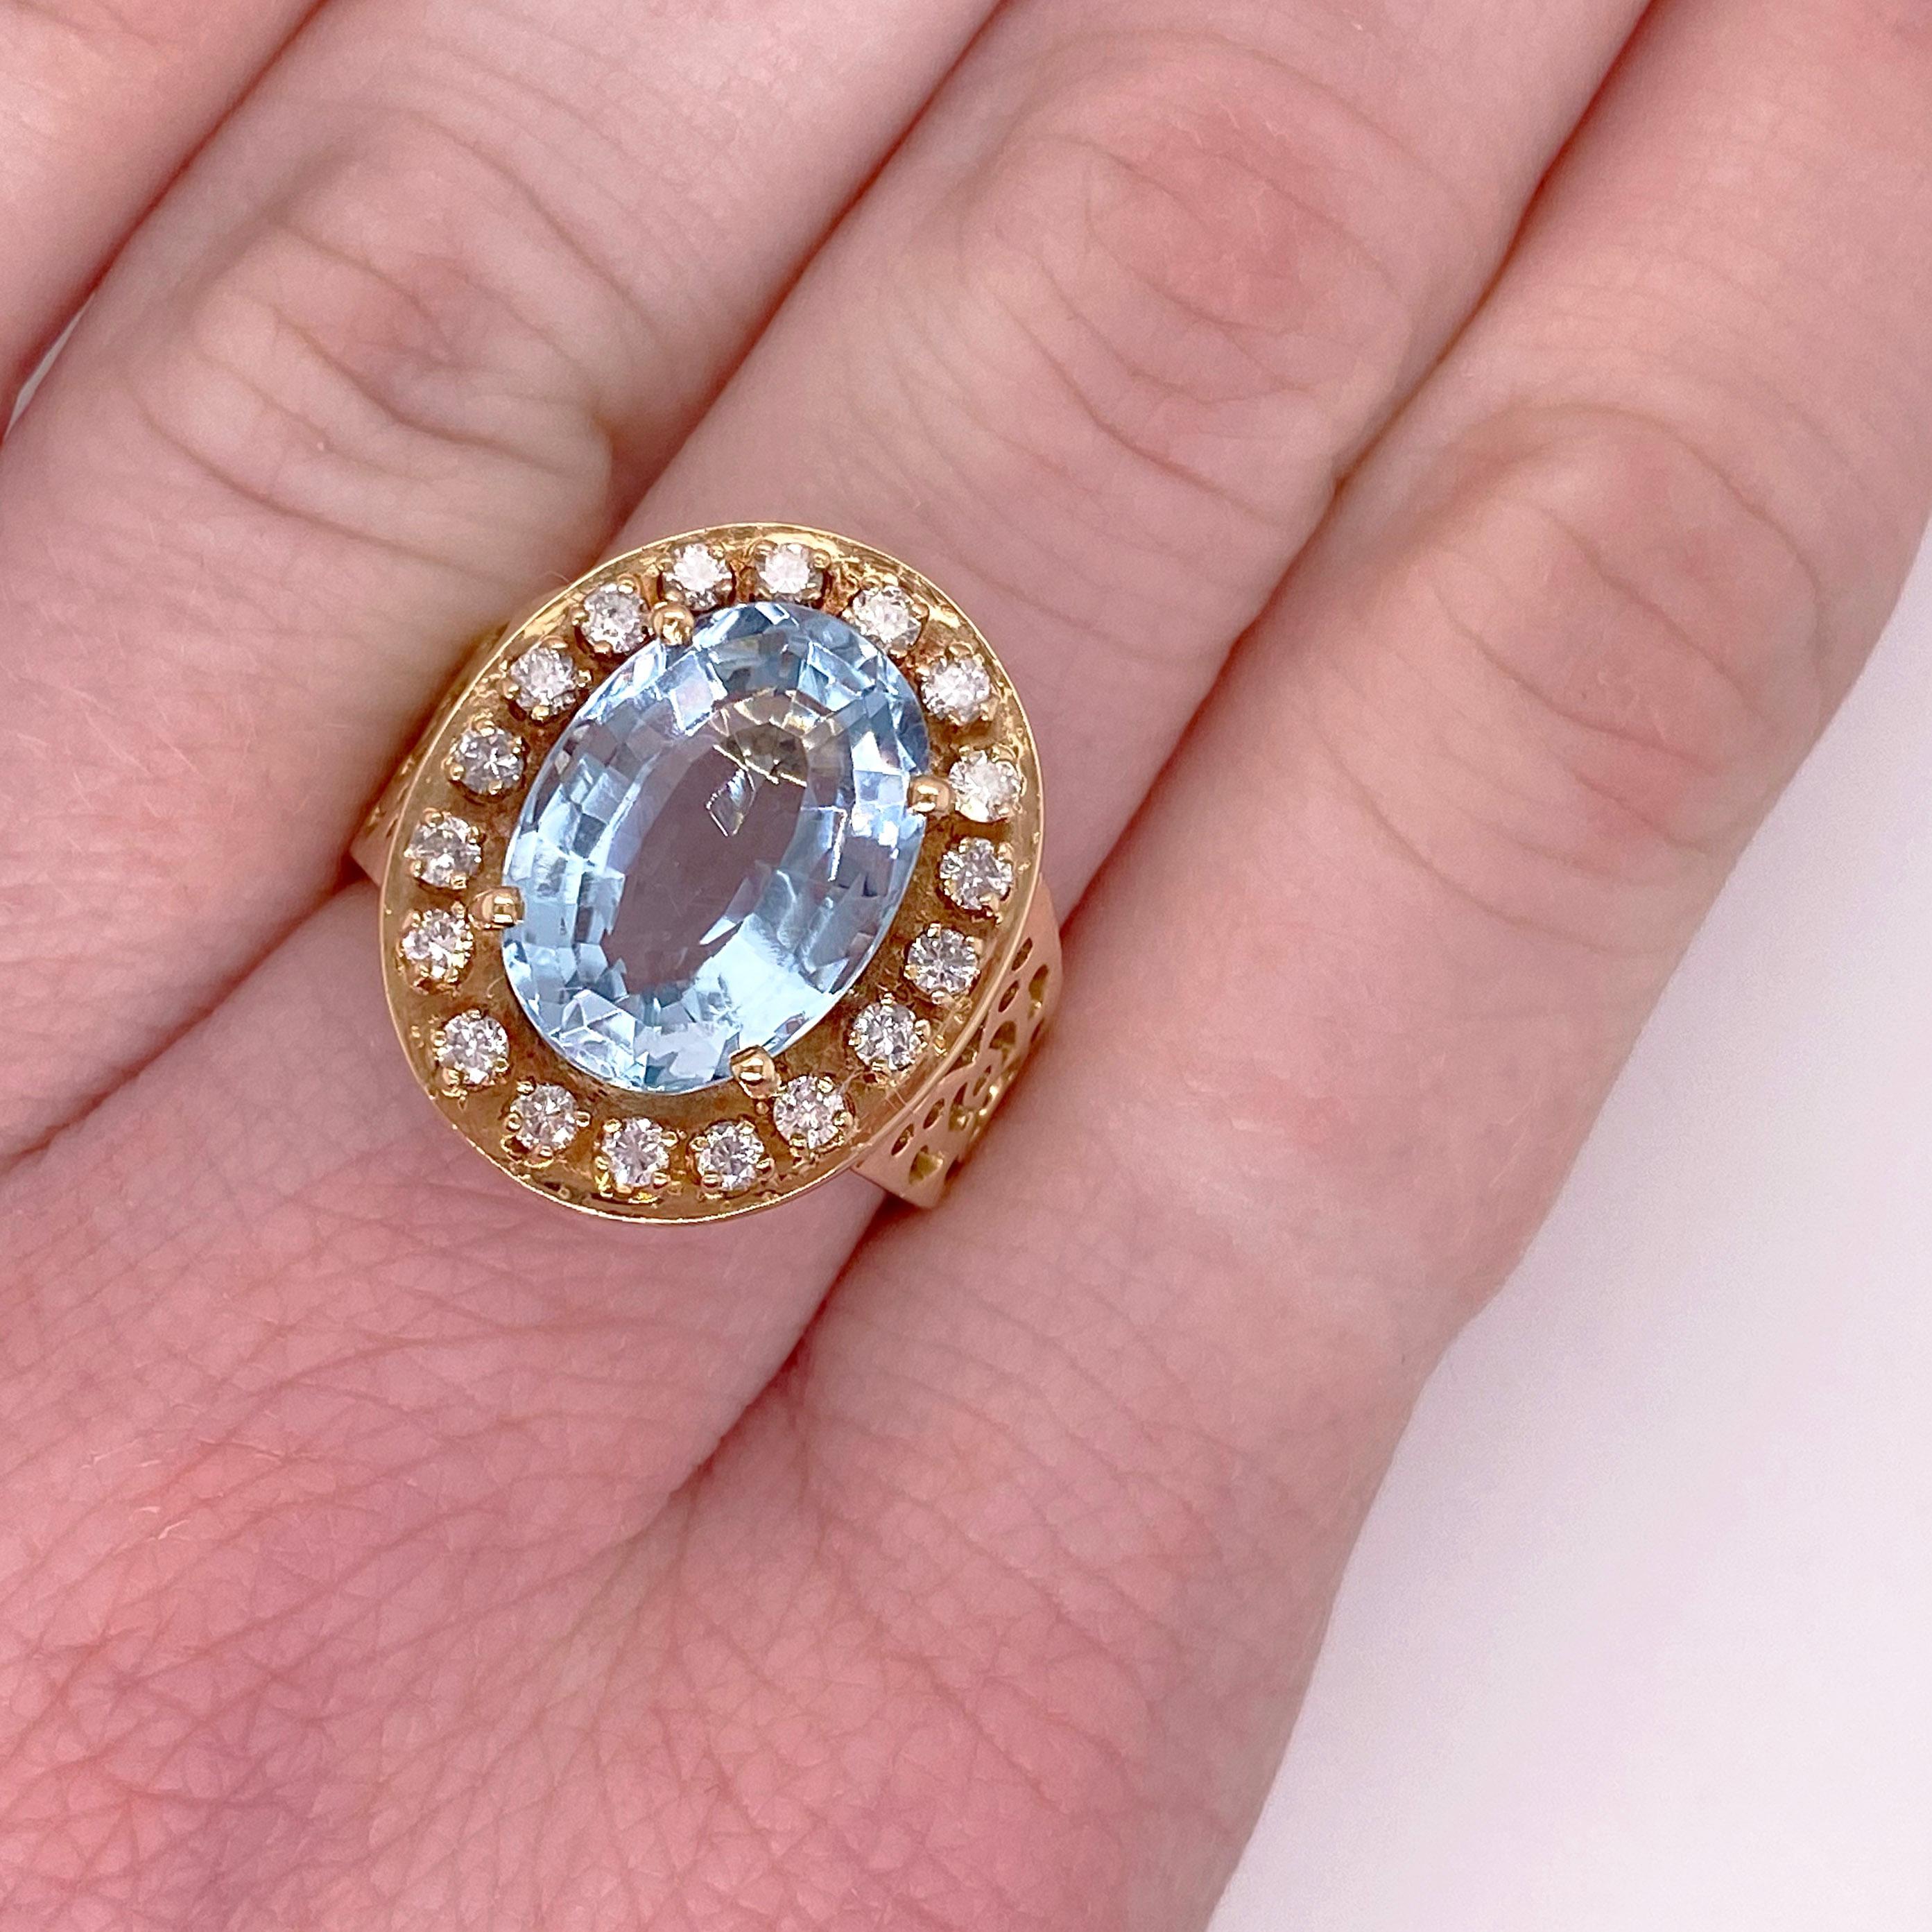 This 5.20 carat genuine and natural aquamarine has a vintage flair.  The filigree design that is cut-out on the sides is very lovely!  The ring has 18 diamonds going around it in a halo design.  You or your loved one will be happy wearing this very